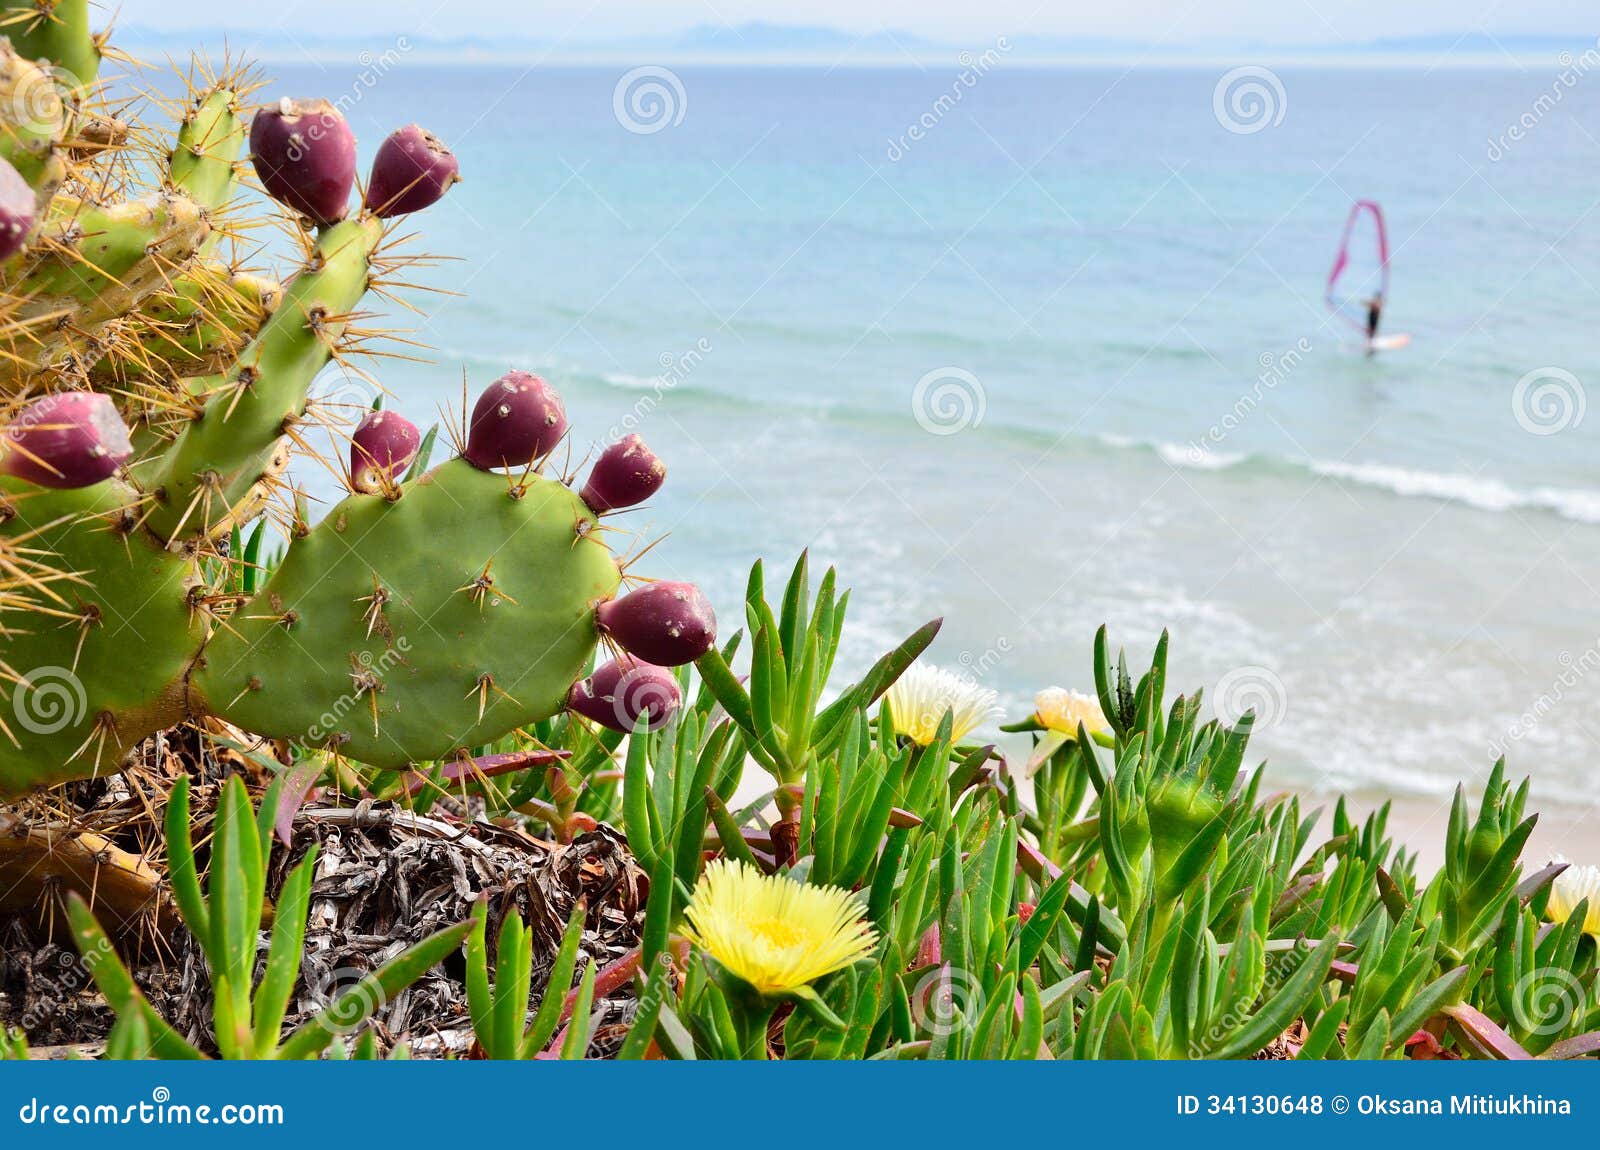 vines flowering beach plants flowering the the and on are Cactuses of succulent background